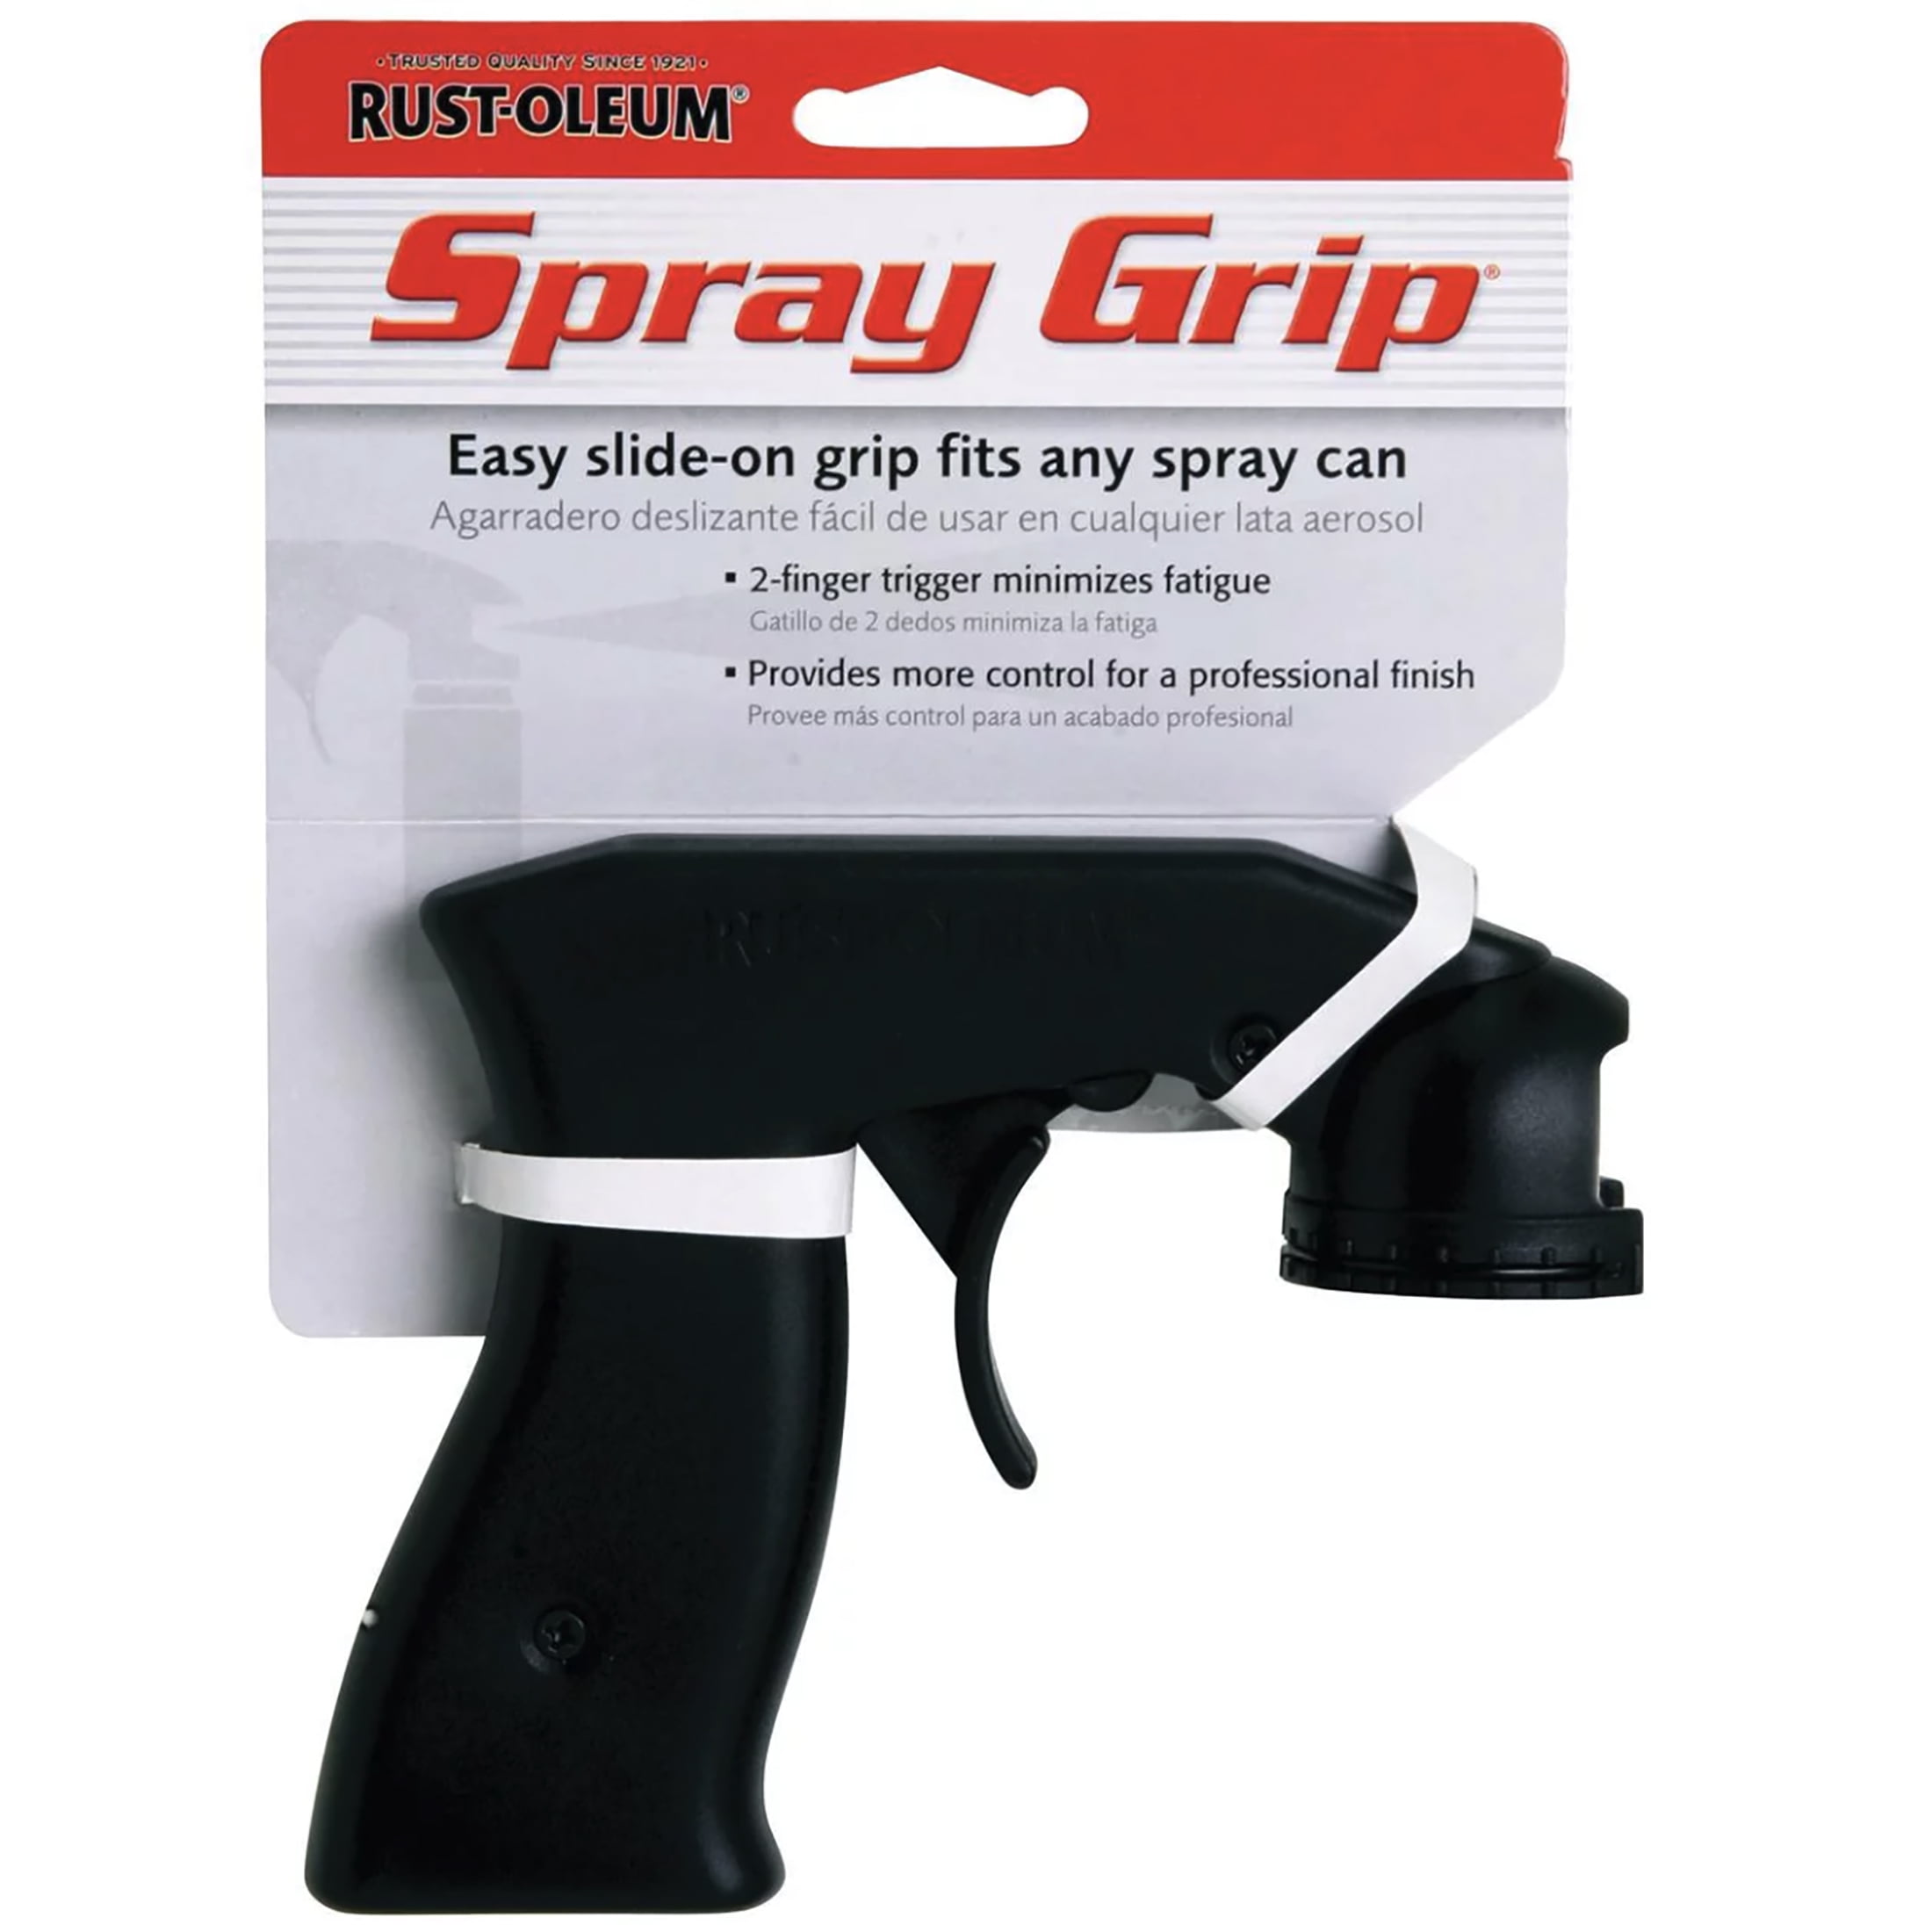 spray can tool with gun trigger for spray paint wrapper WRAPPER Frame